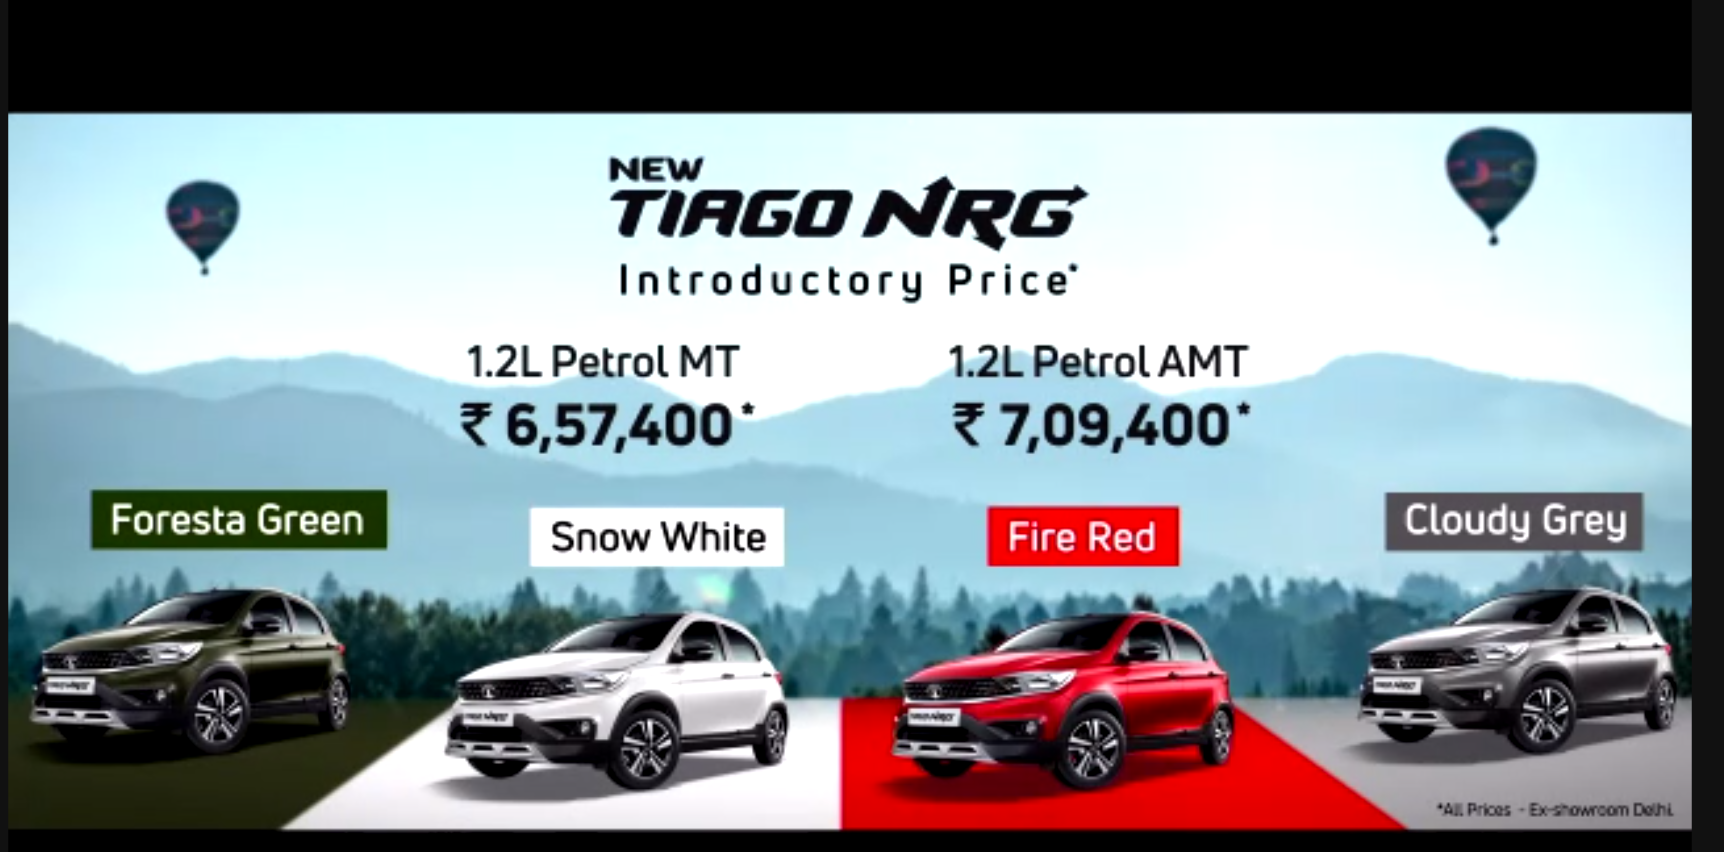 <p>Here are the prices for the 2021 Tata Tiago NRG</p>